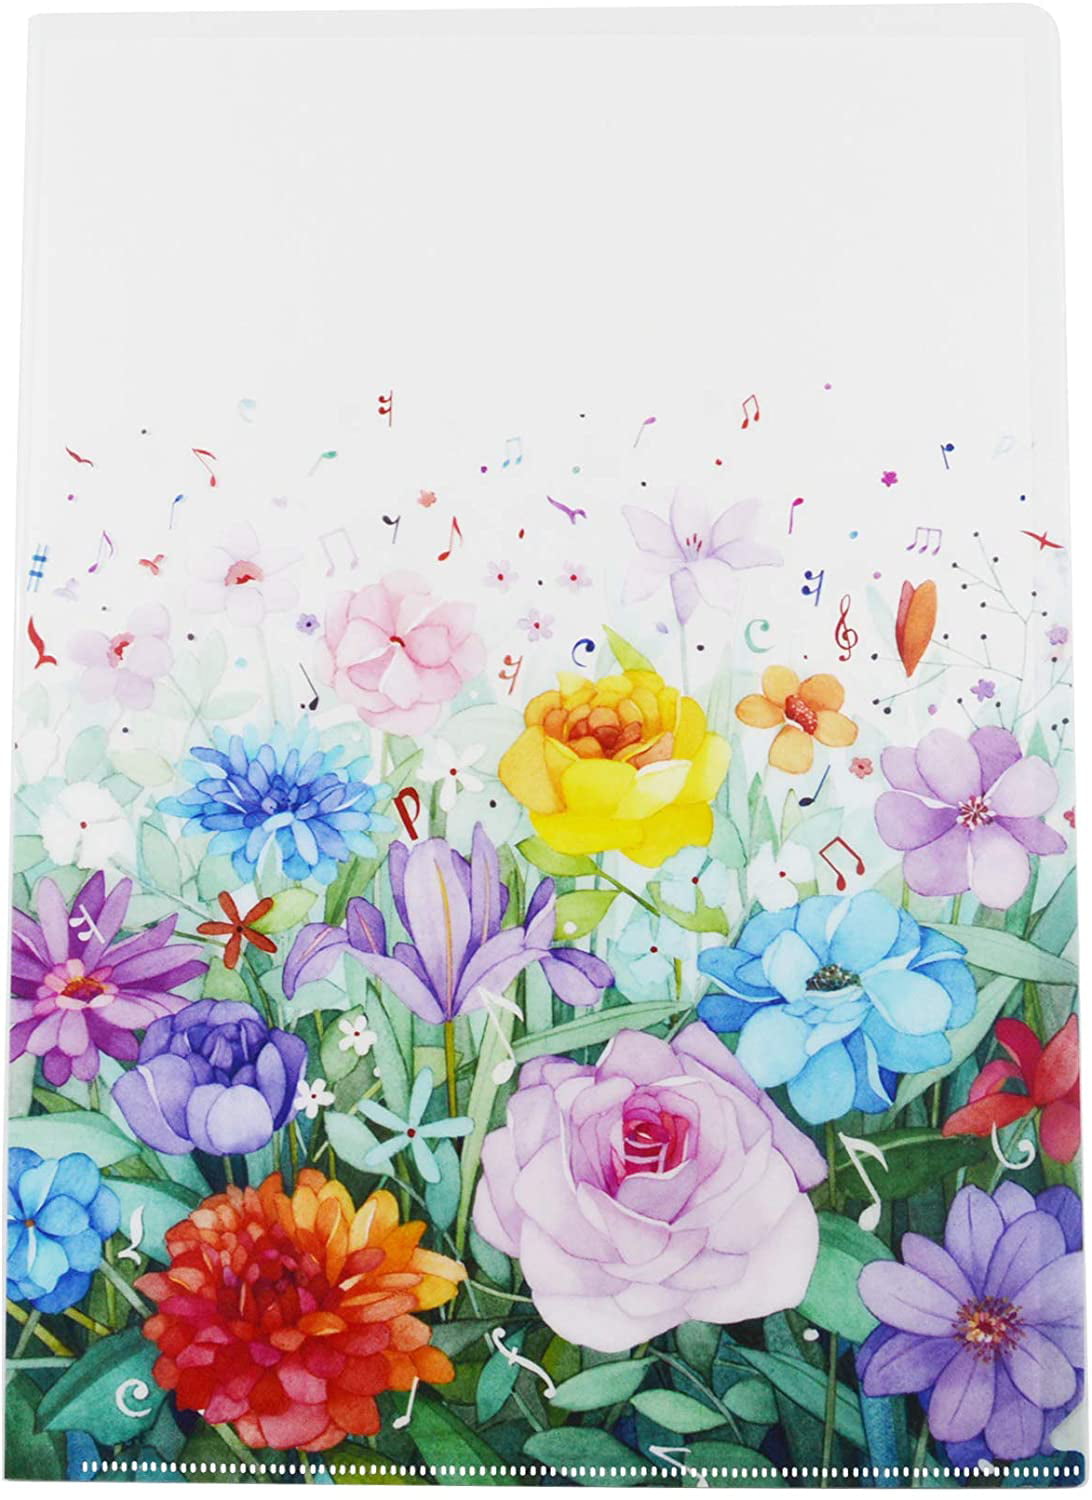 Frontia A4 Size 8.27 x 11.69 Clear Plastic Folder Flower Design Cute Froral Japan Import 